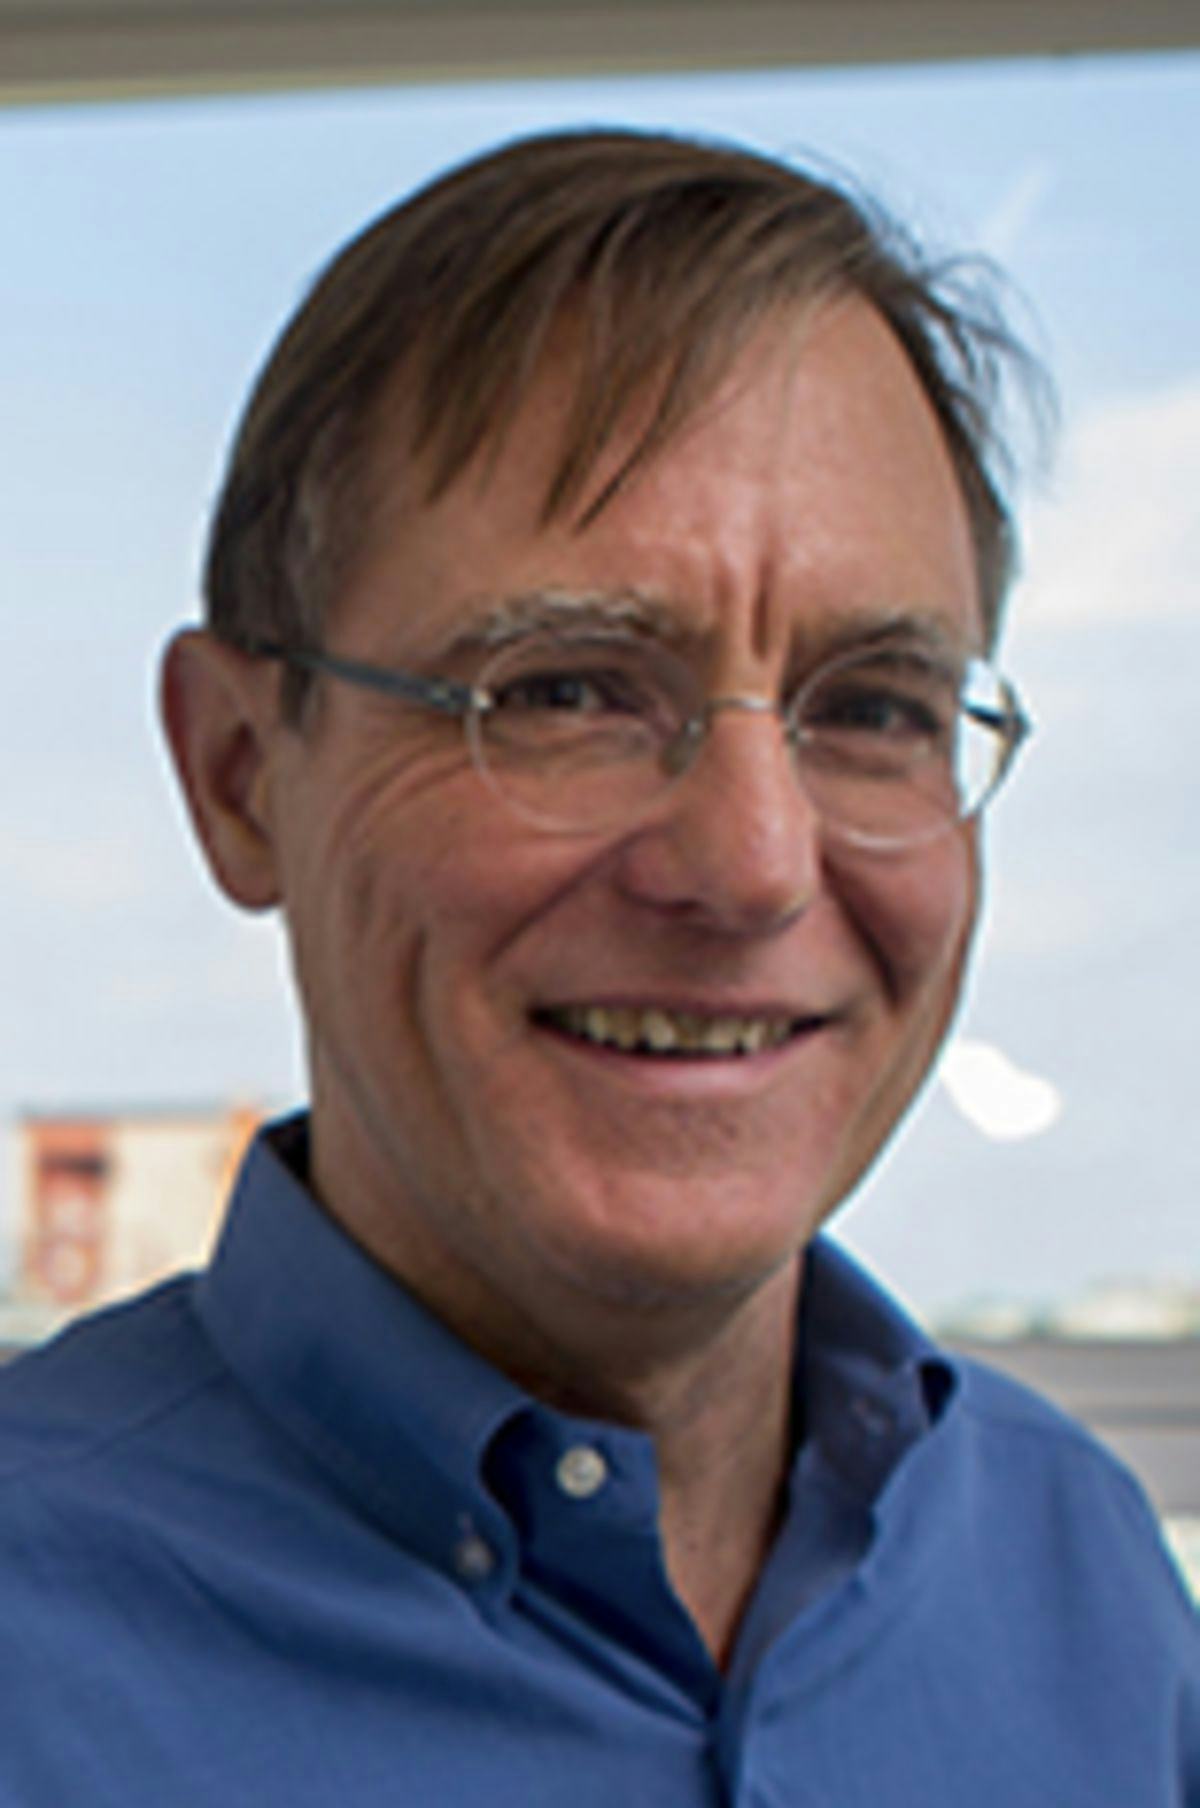 Headshot of Dr. Nickerson in a blue shirt with the Hoboken skyline in the background.